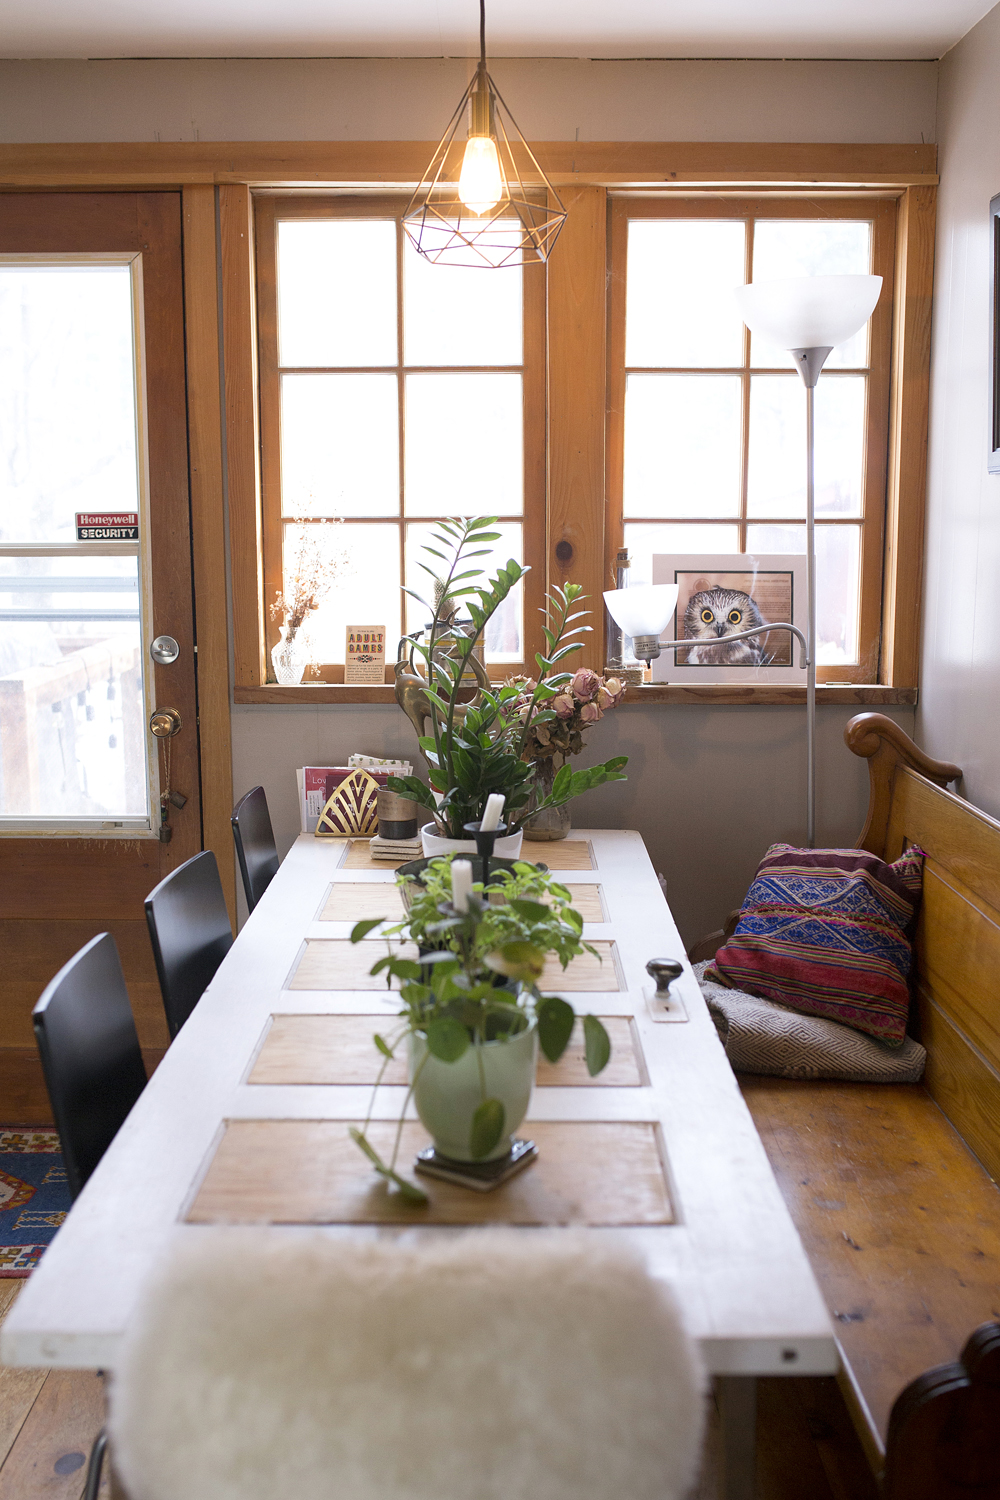 Dining room table with church pew and plants